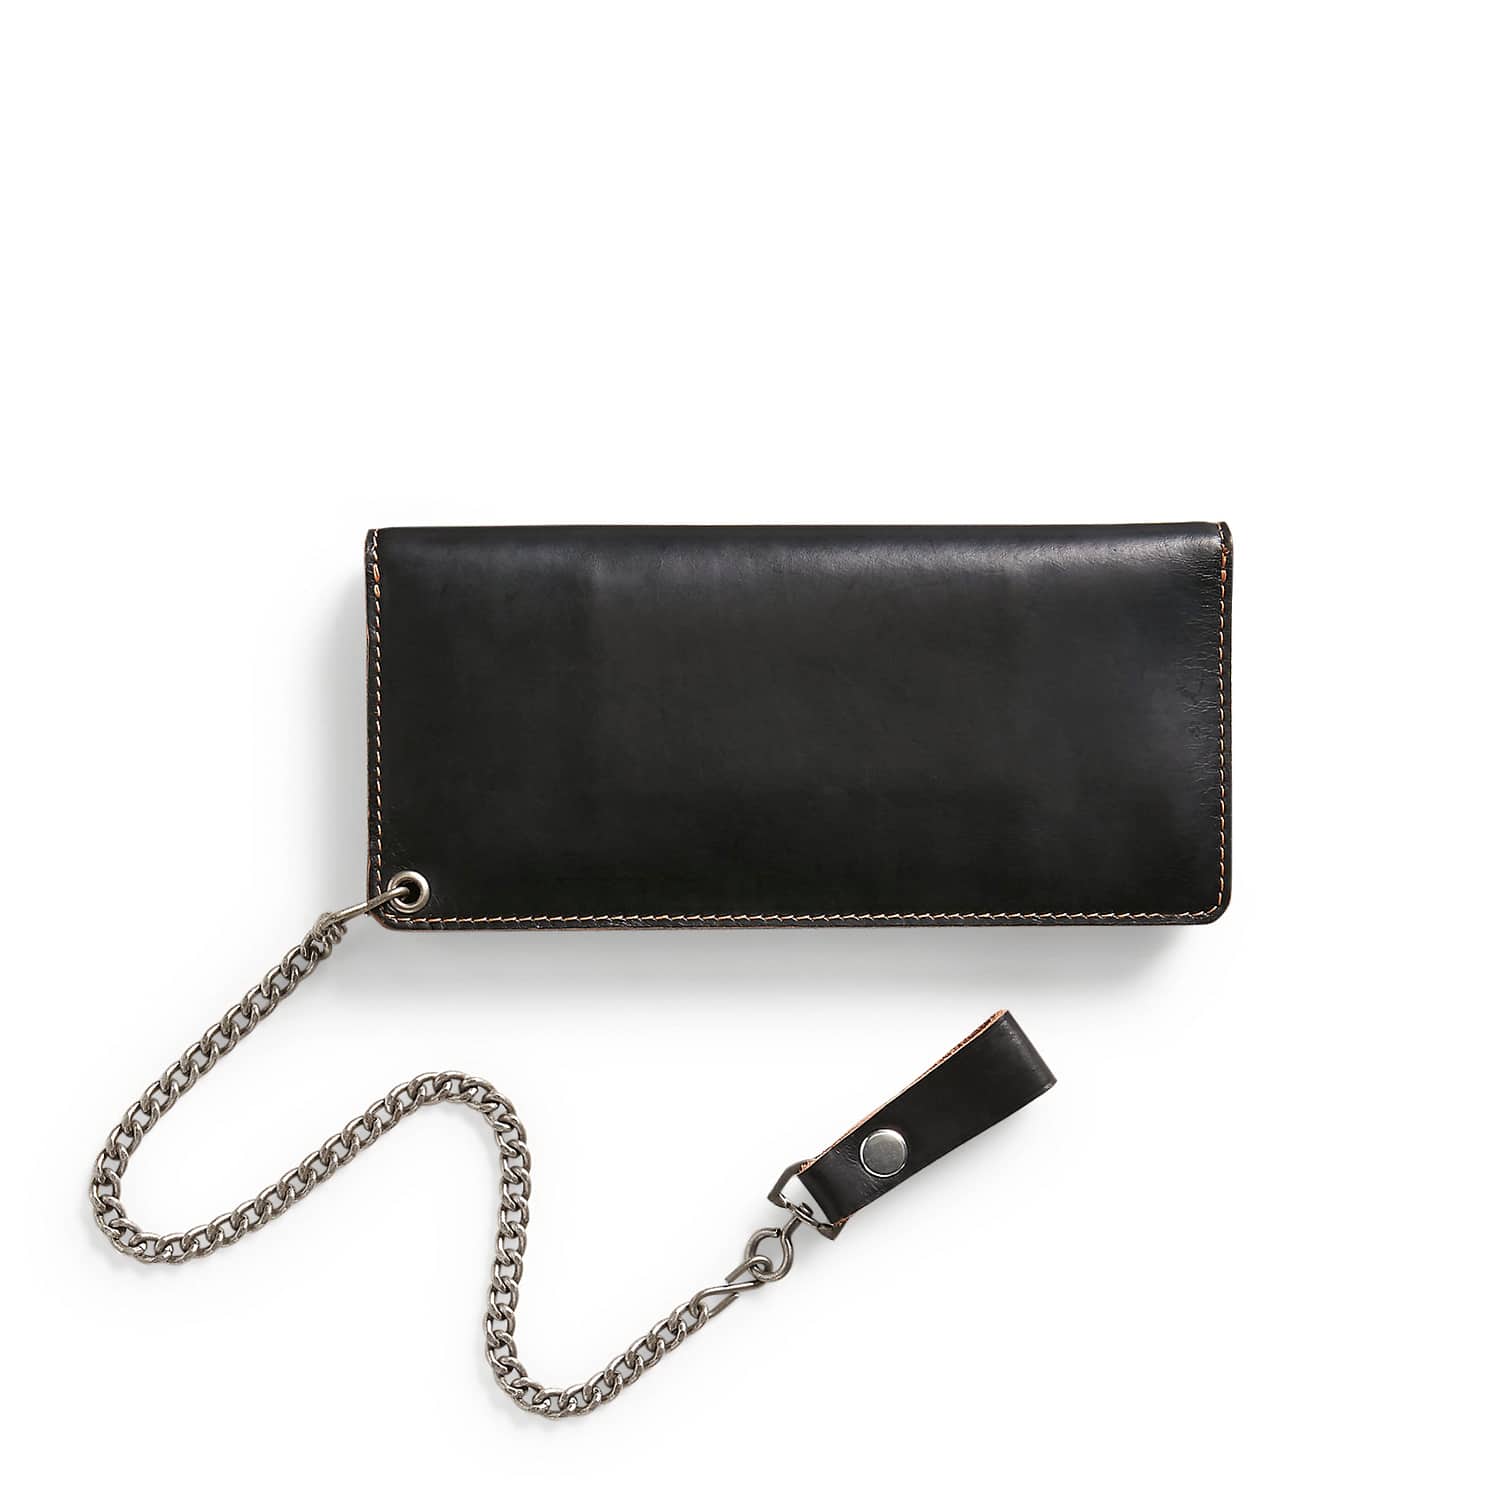 Chain and Strap Wallets Collection for Women